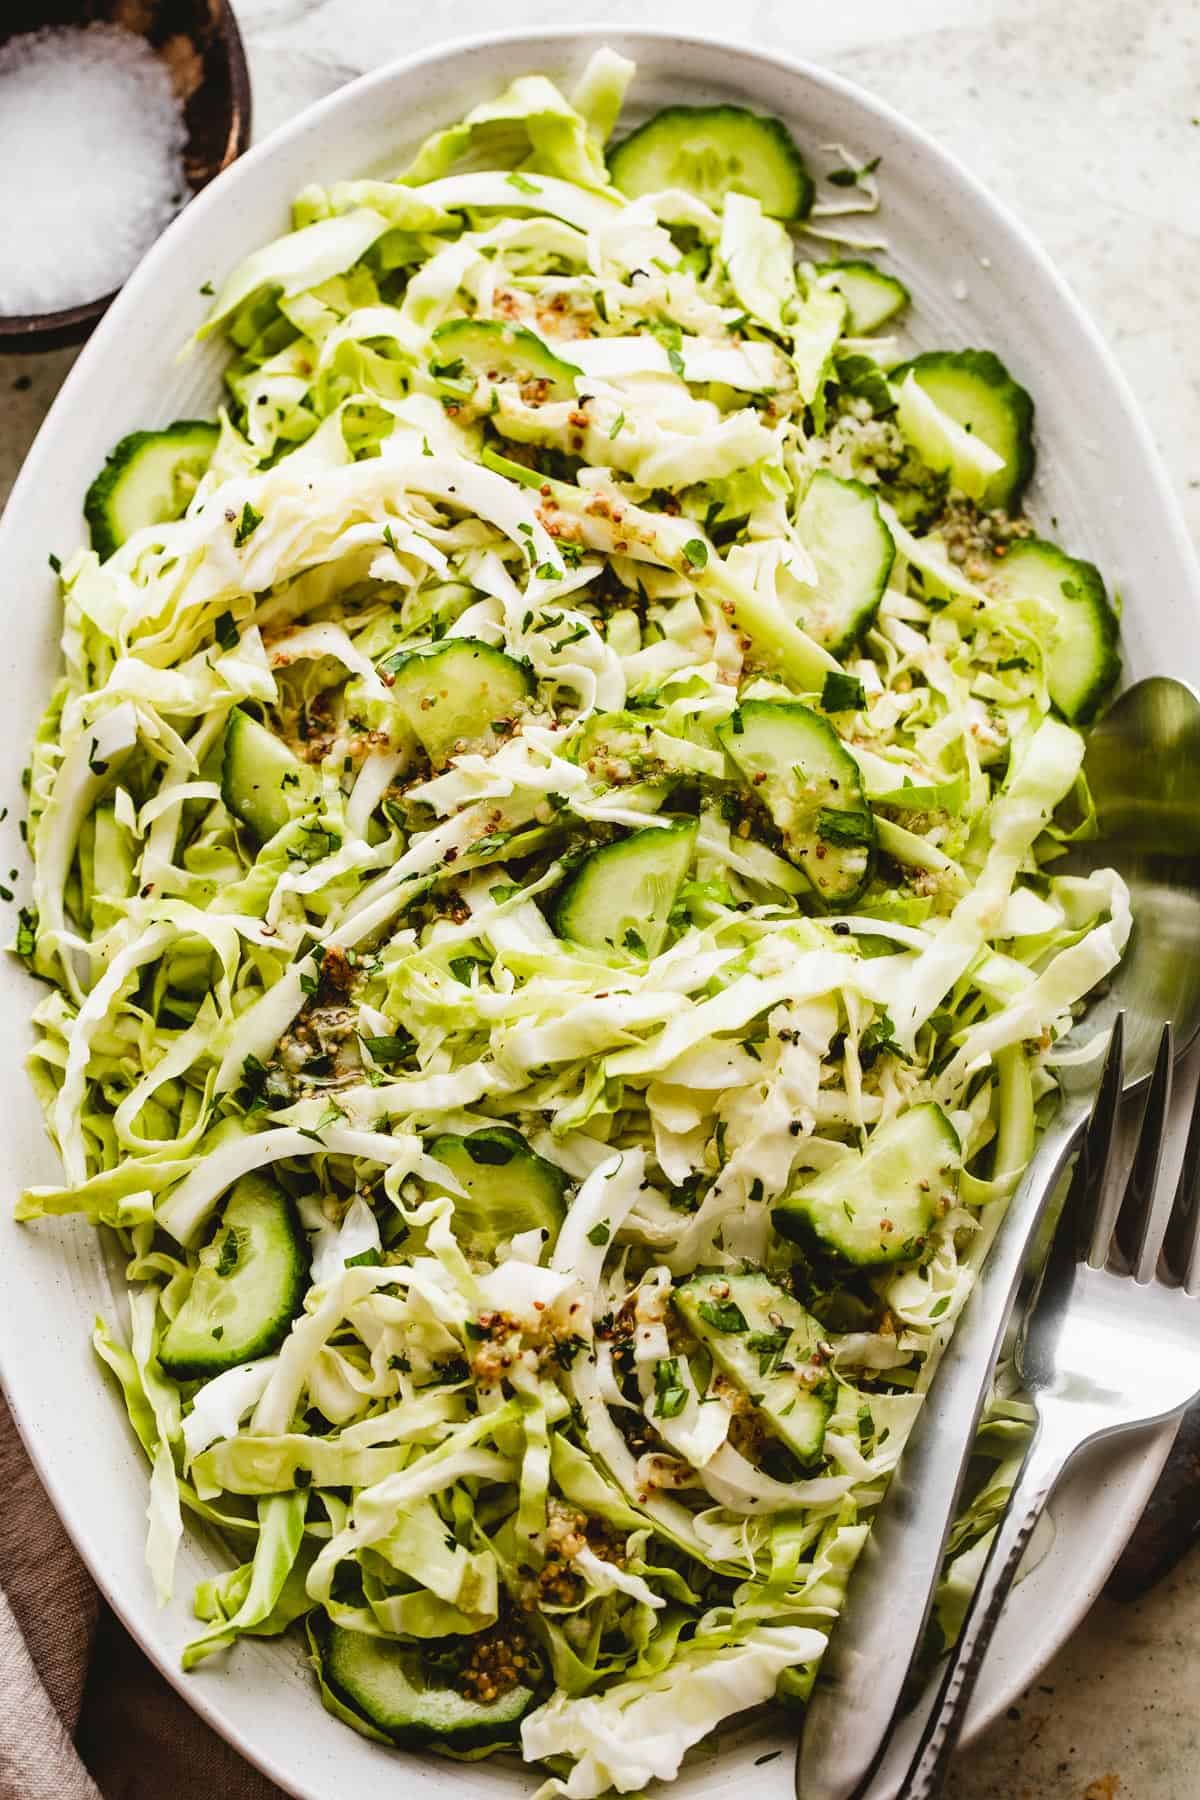 Cabbage Cucumber Salad served on an oblong serving plate with a large fork and spoon placed to the side of the salad.